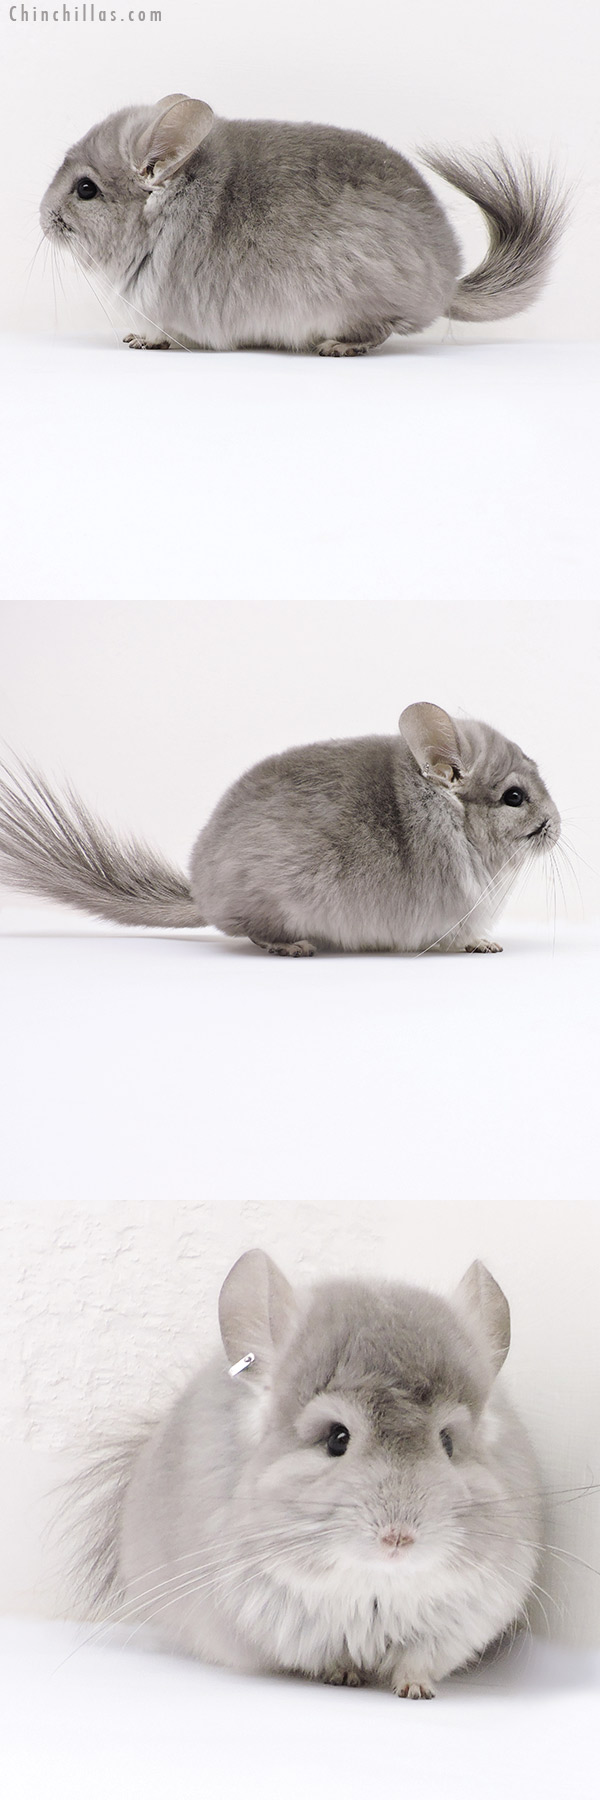 Chinchilla or related item offered for sale or export on Chinchillas.com - 18167 Violet  Royal Persian Angora Male Chinchilla